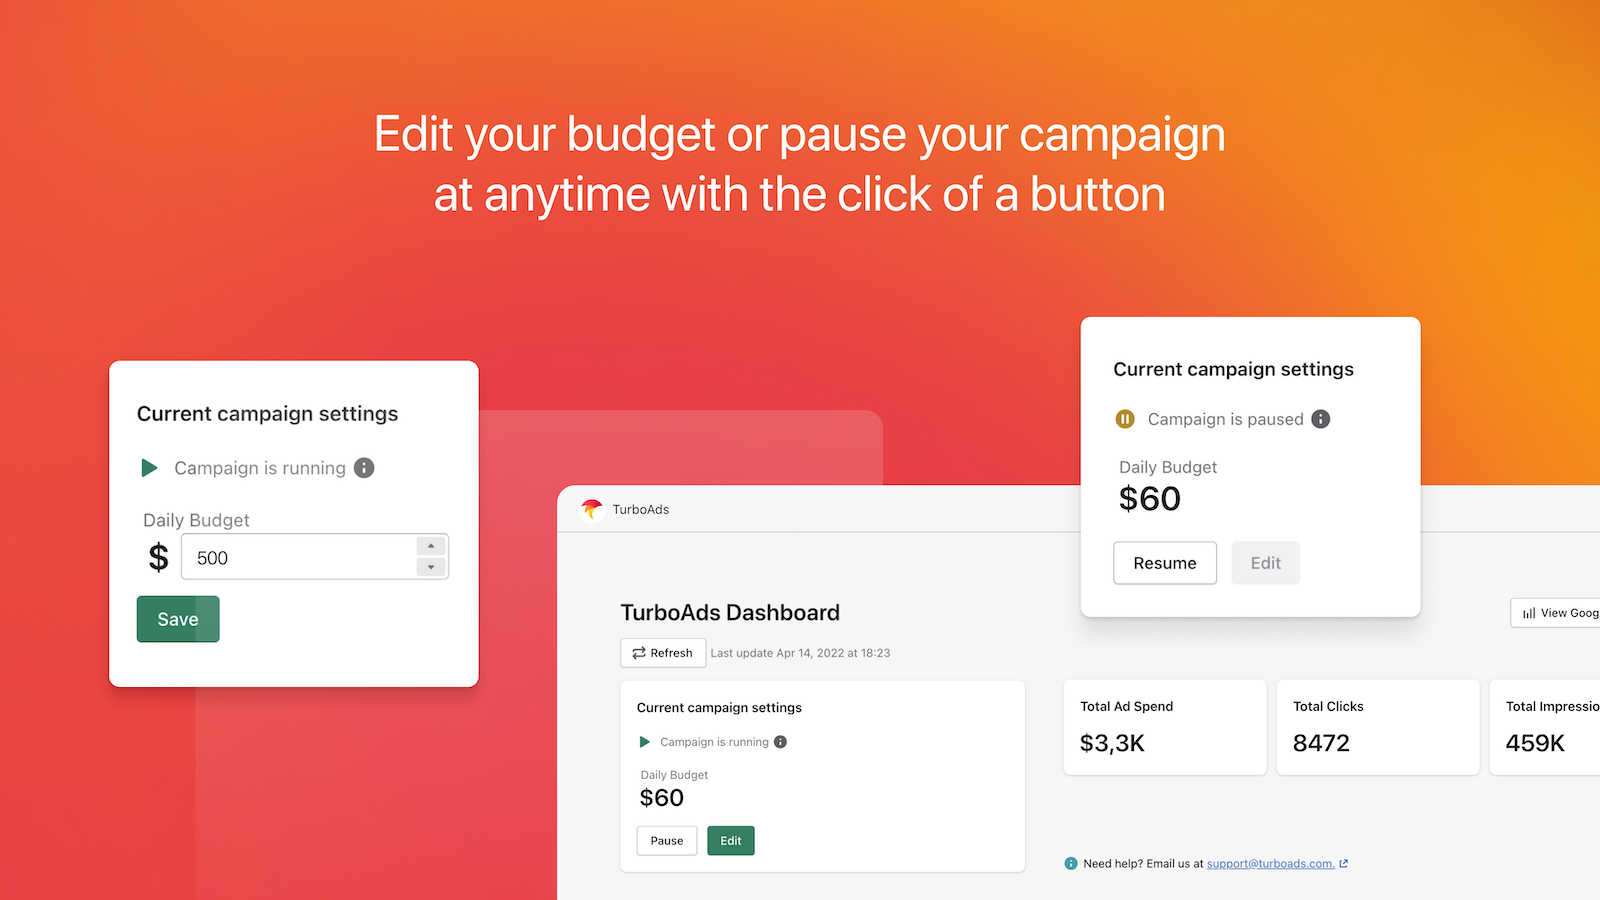 Edit your budget or pause your campaign anytime